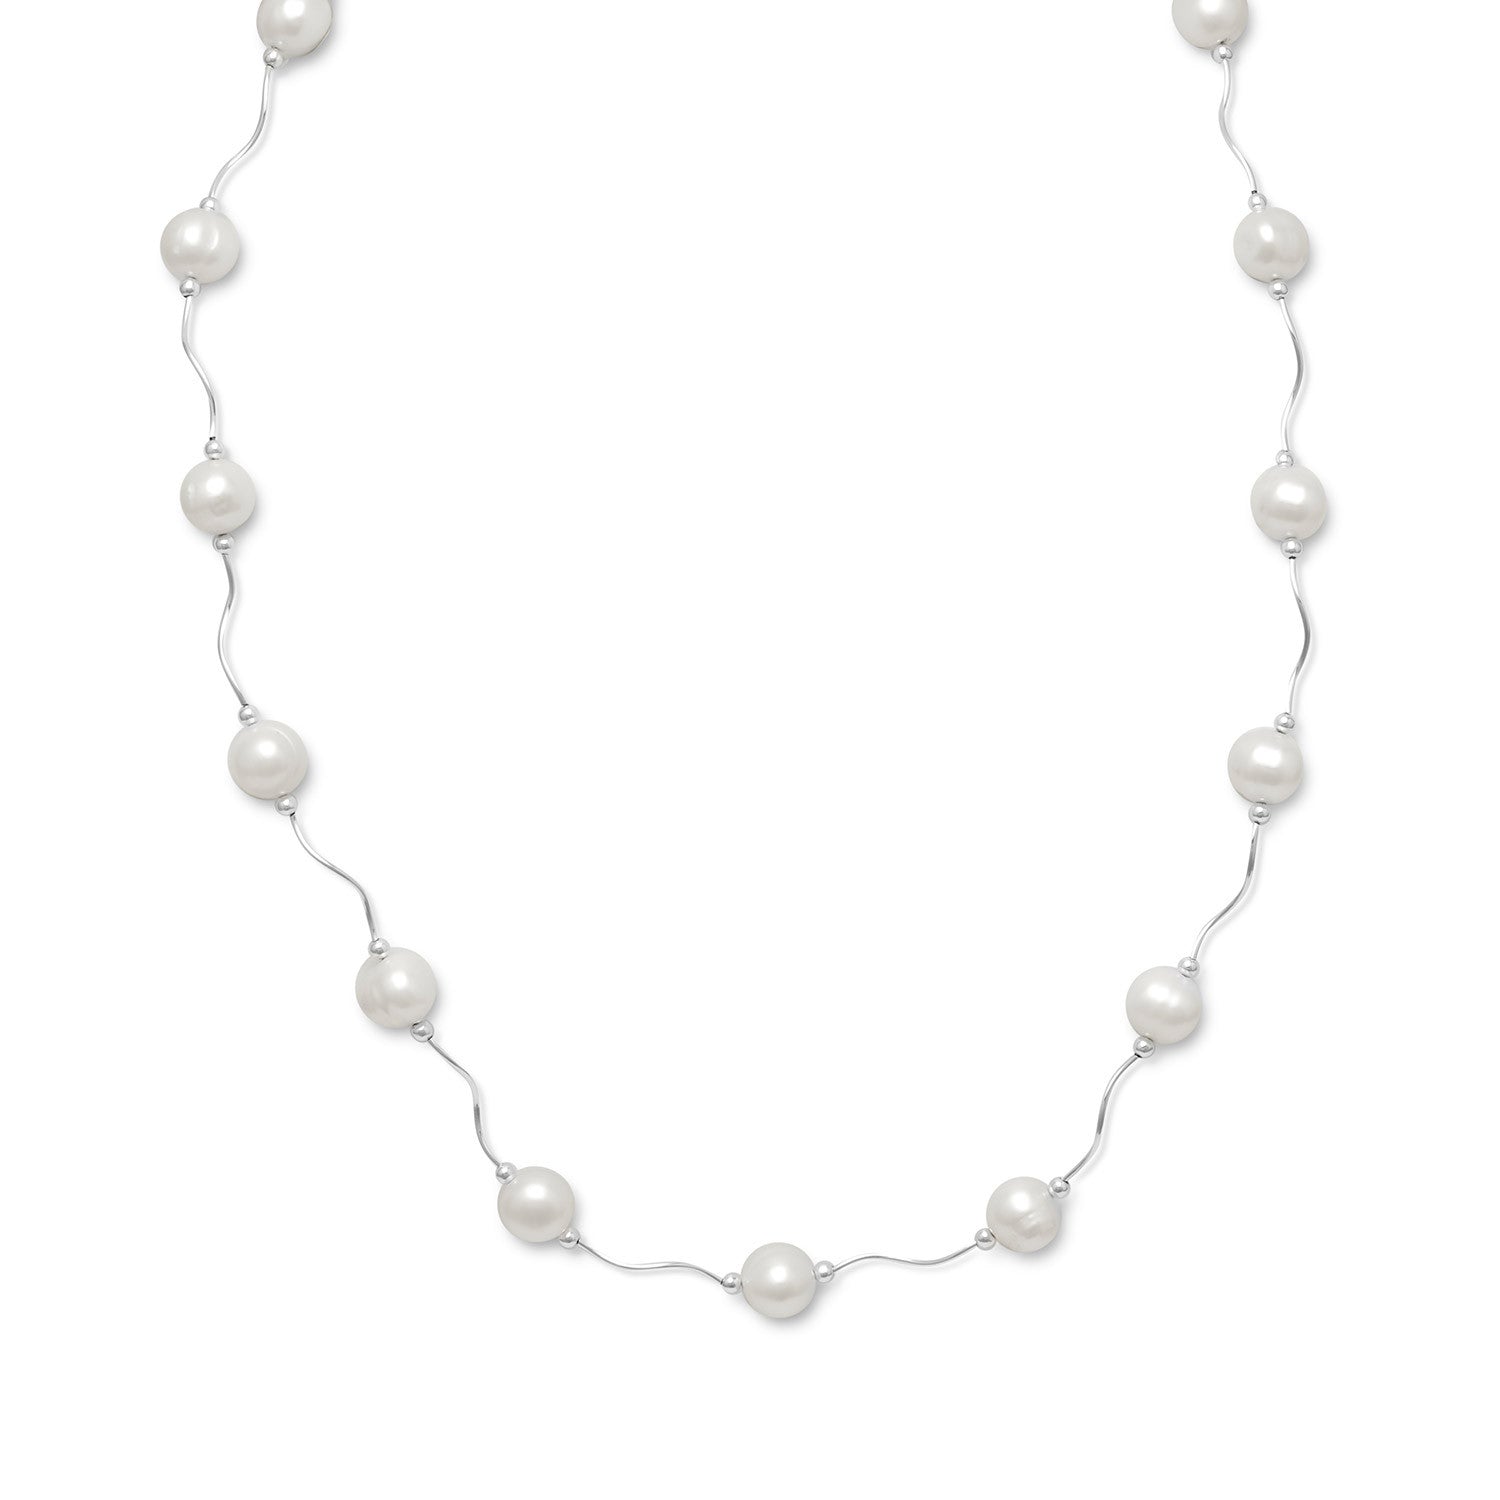 17"+2" Extension Wave Design Necklace with Cultured Freshwater Pearls